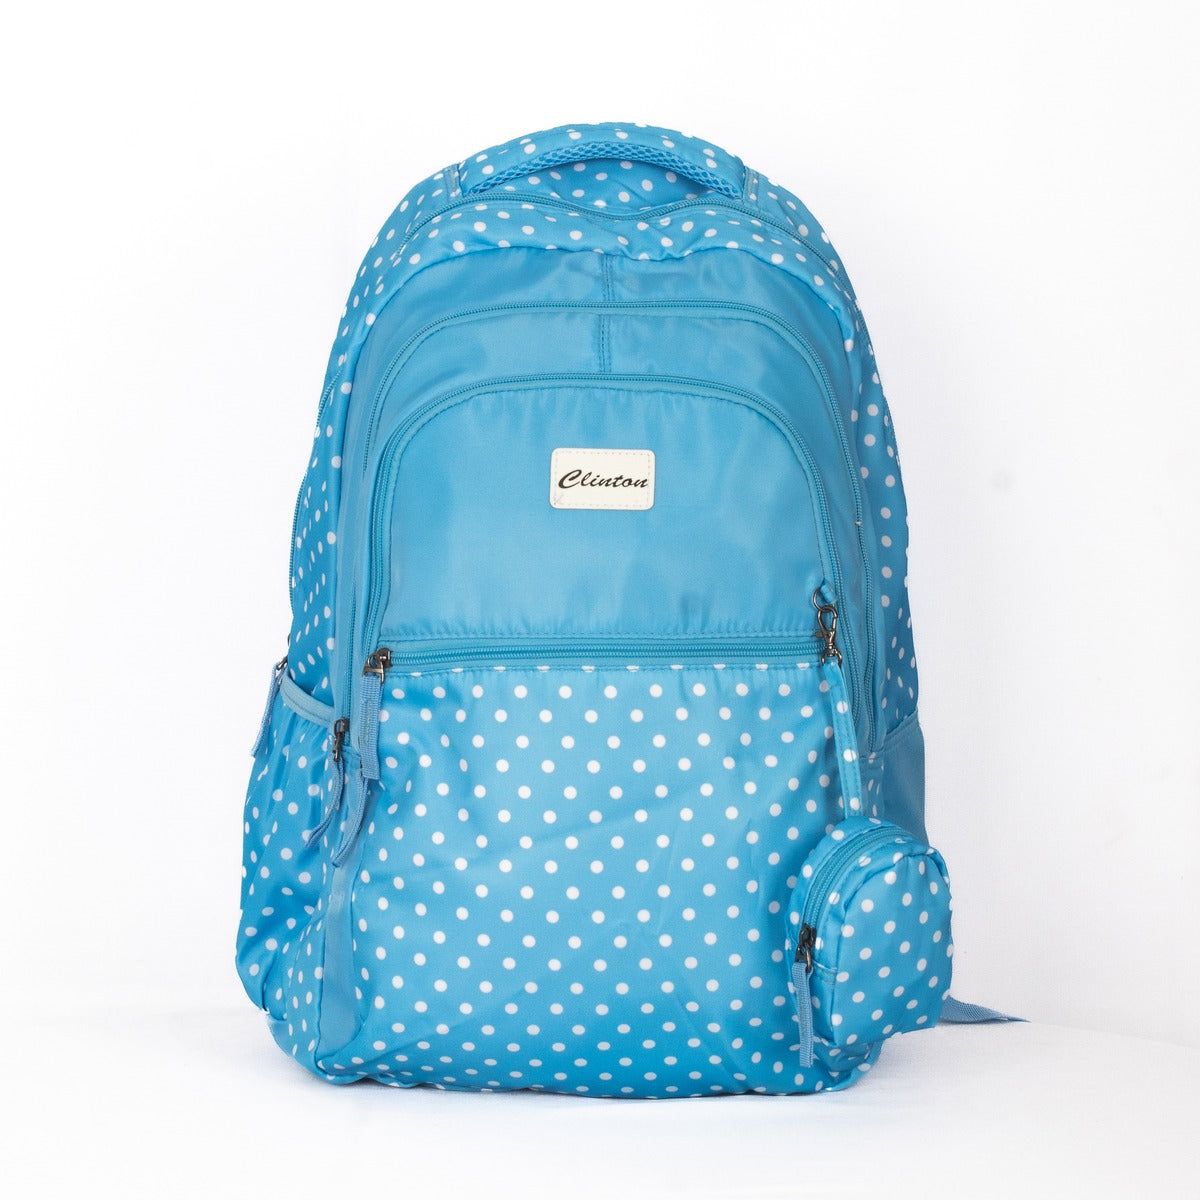 Espiral Polka Dotted Multi Zipper Backpack Bag with Pouch Zaappy